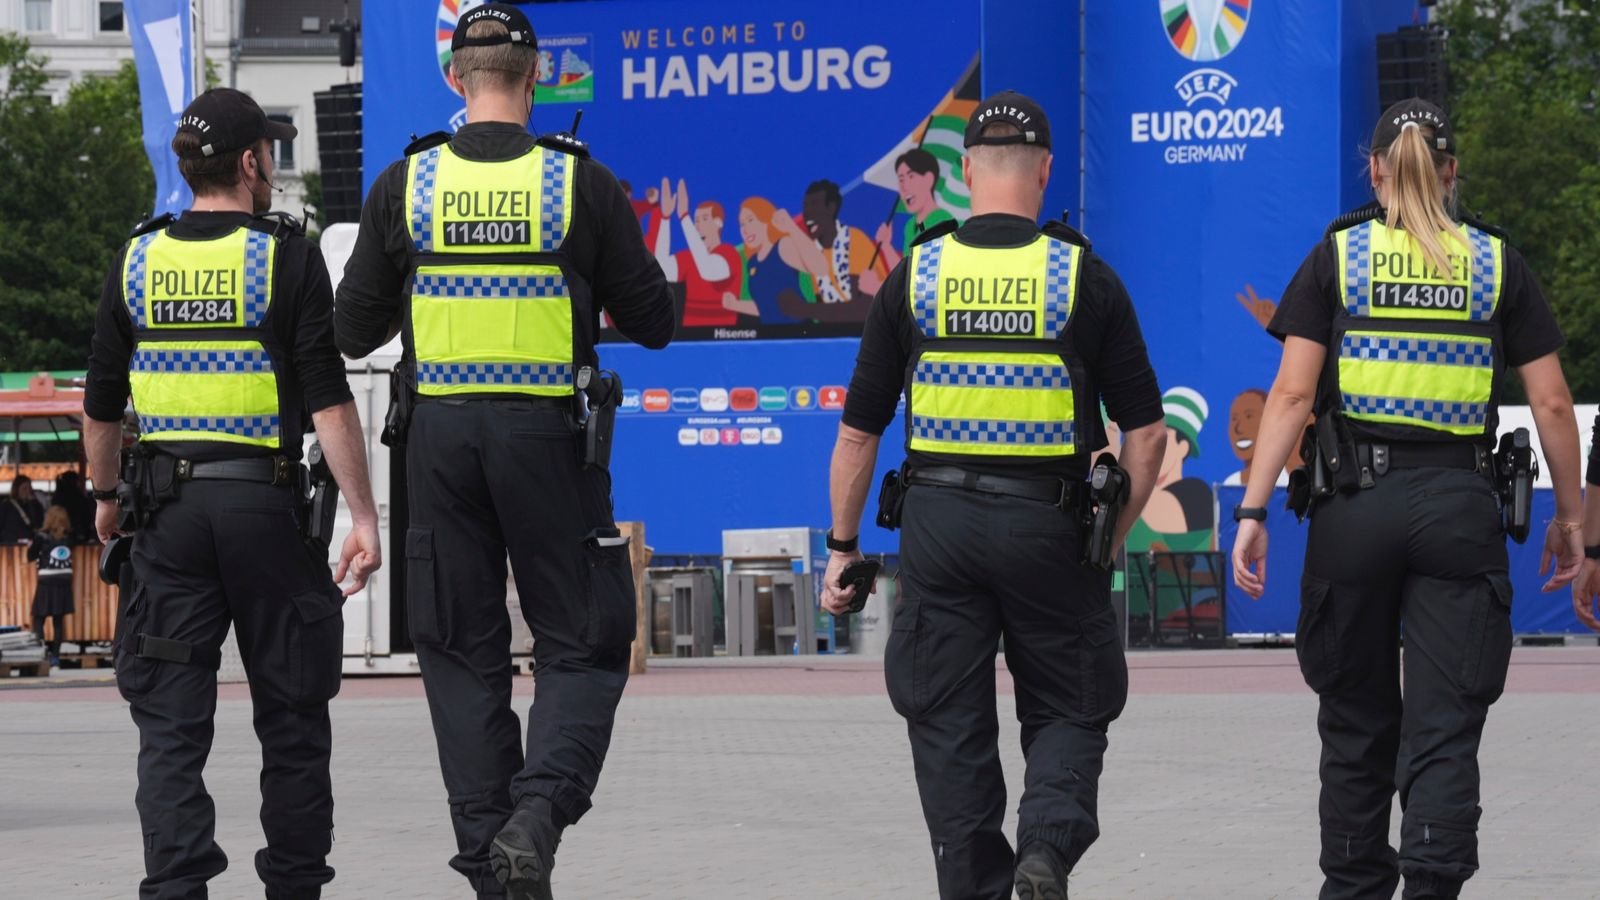 Man charged with attempted manslaughter over axe incident at Euro 2024 | Football News